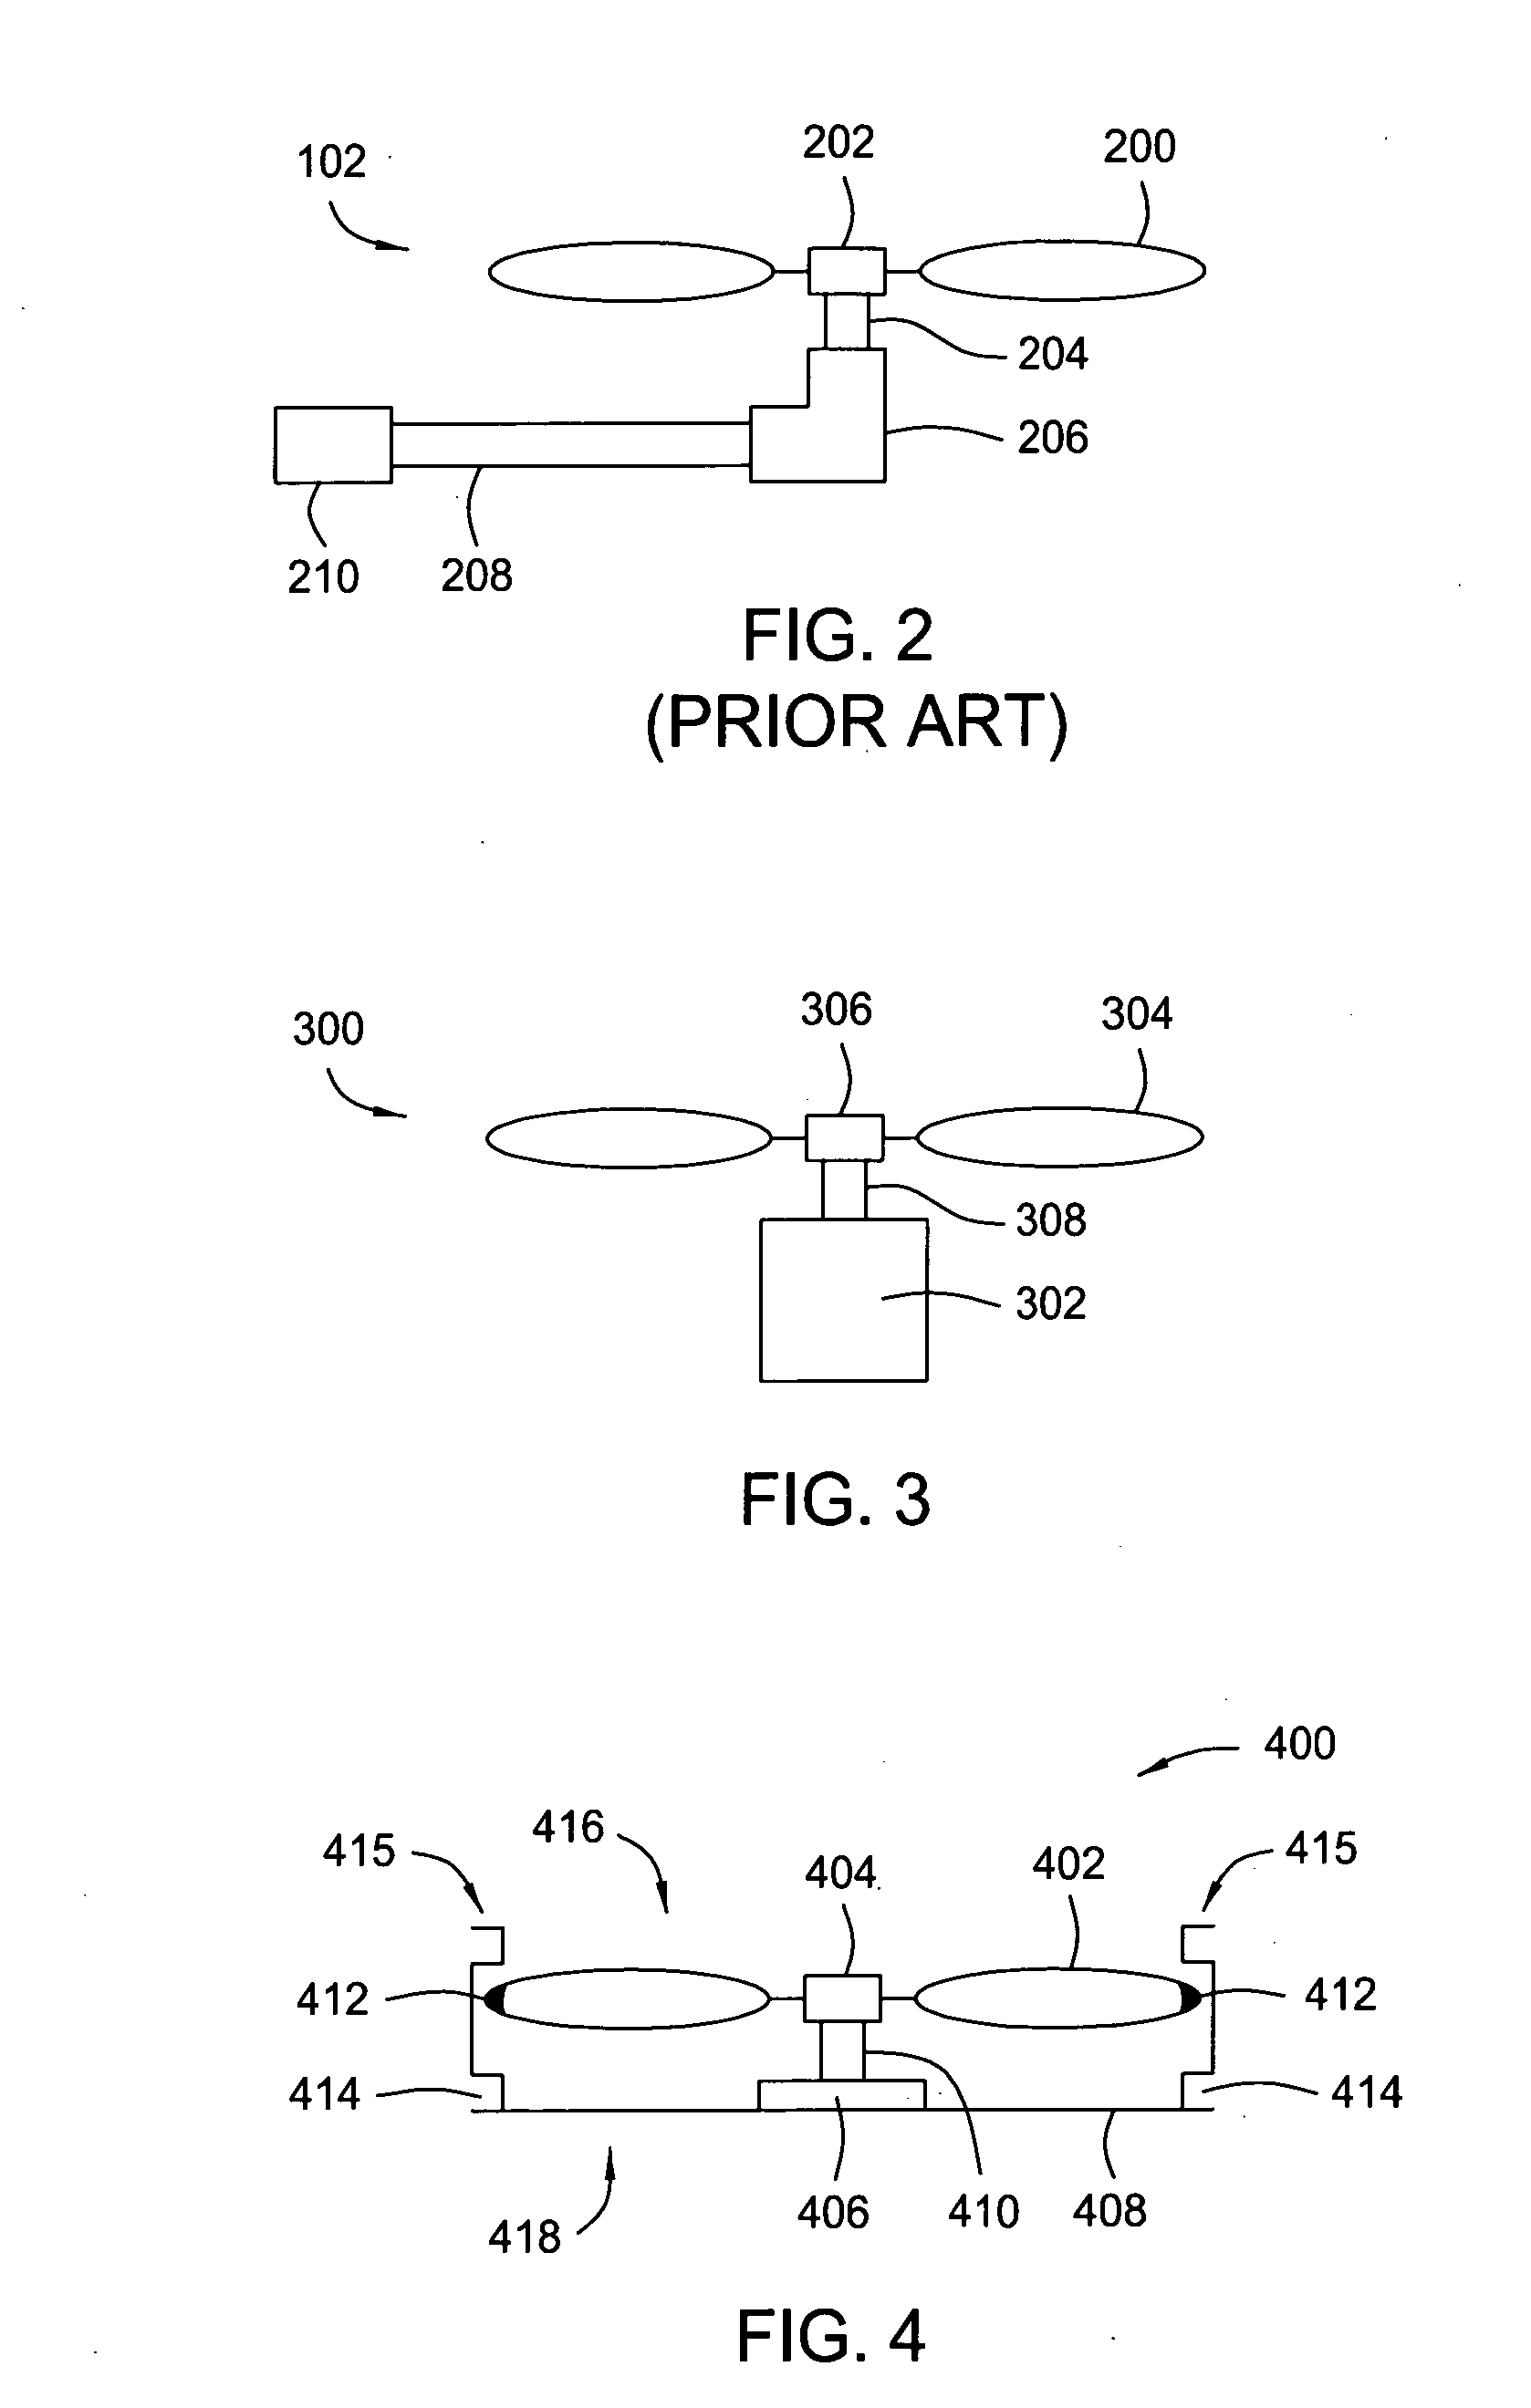 Apparatus and system for driving a fan using a linear induction motor